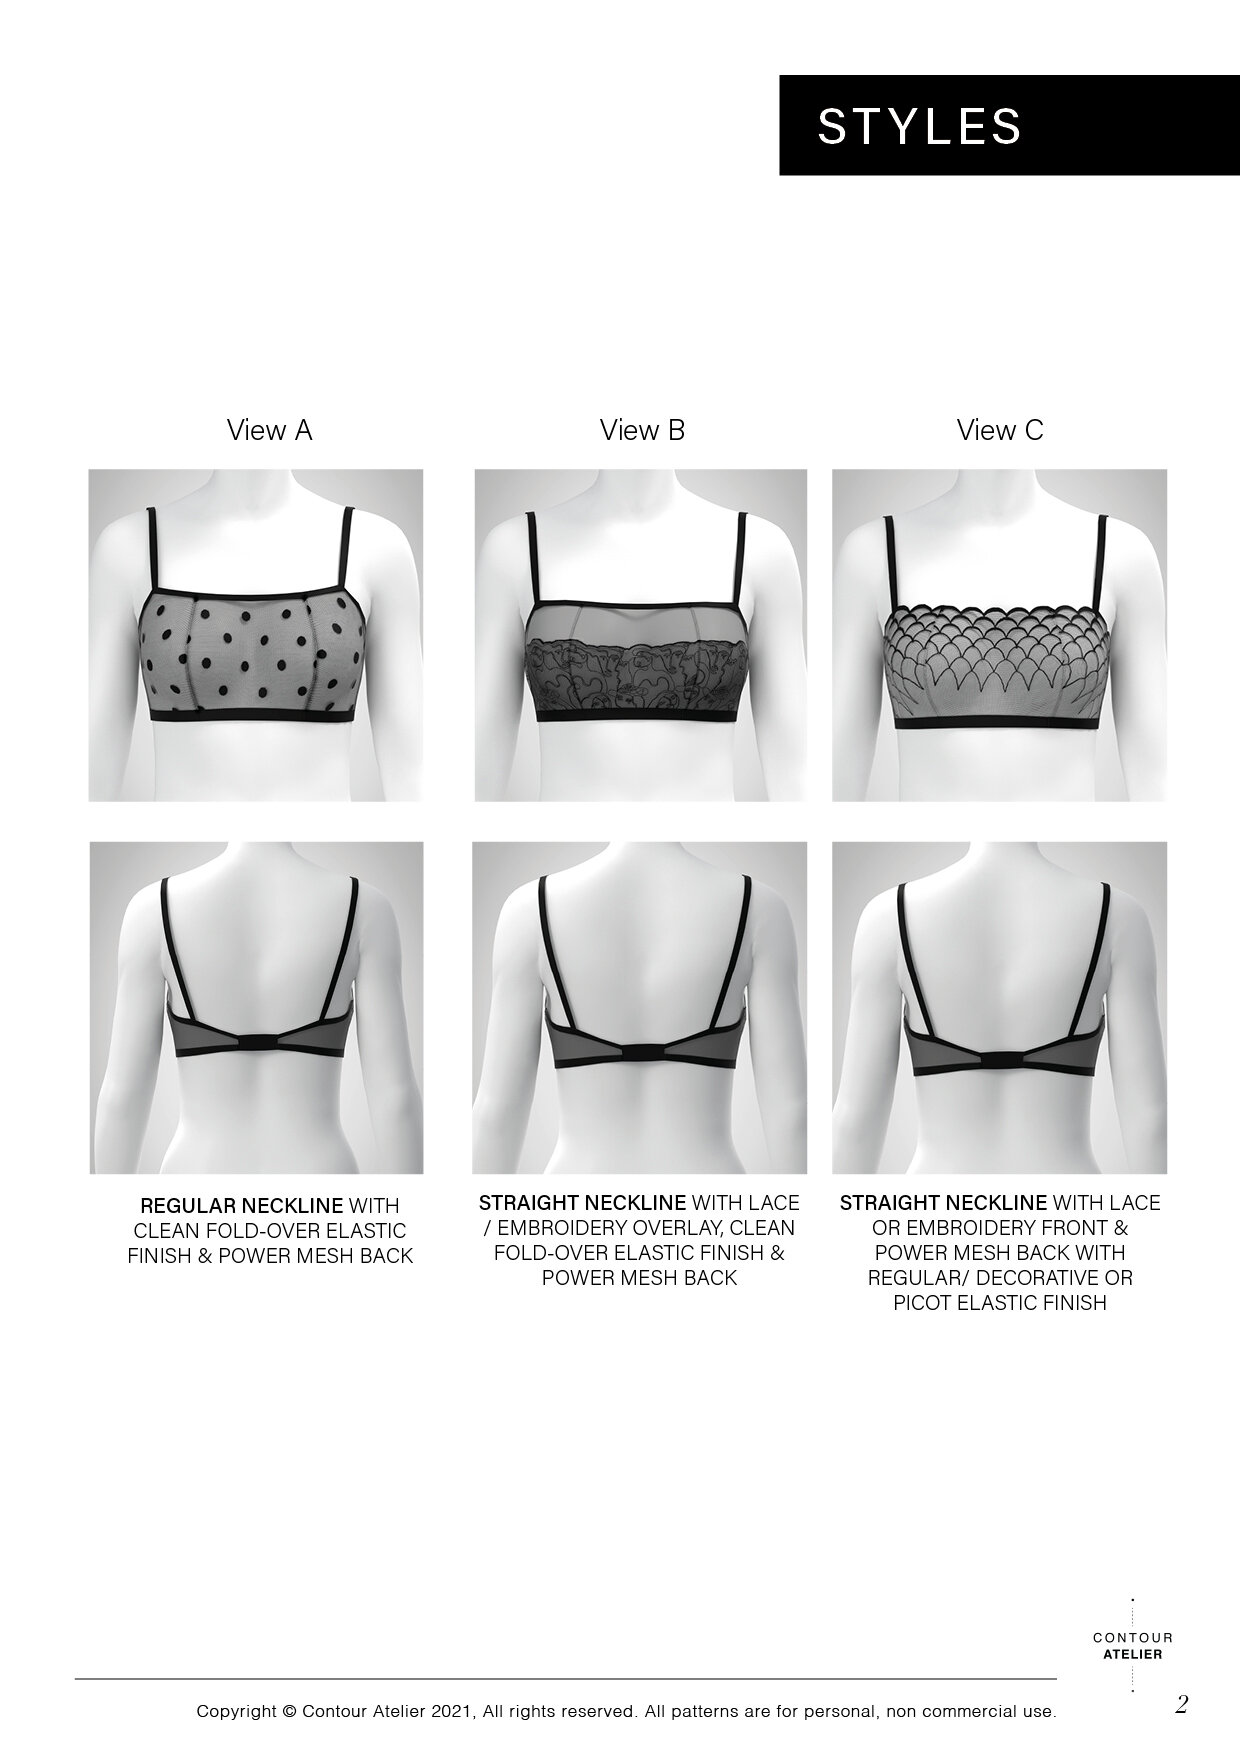 About measuring methods to determine the bra size – AFI Atelier